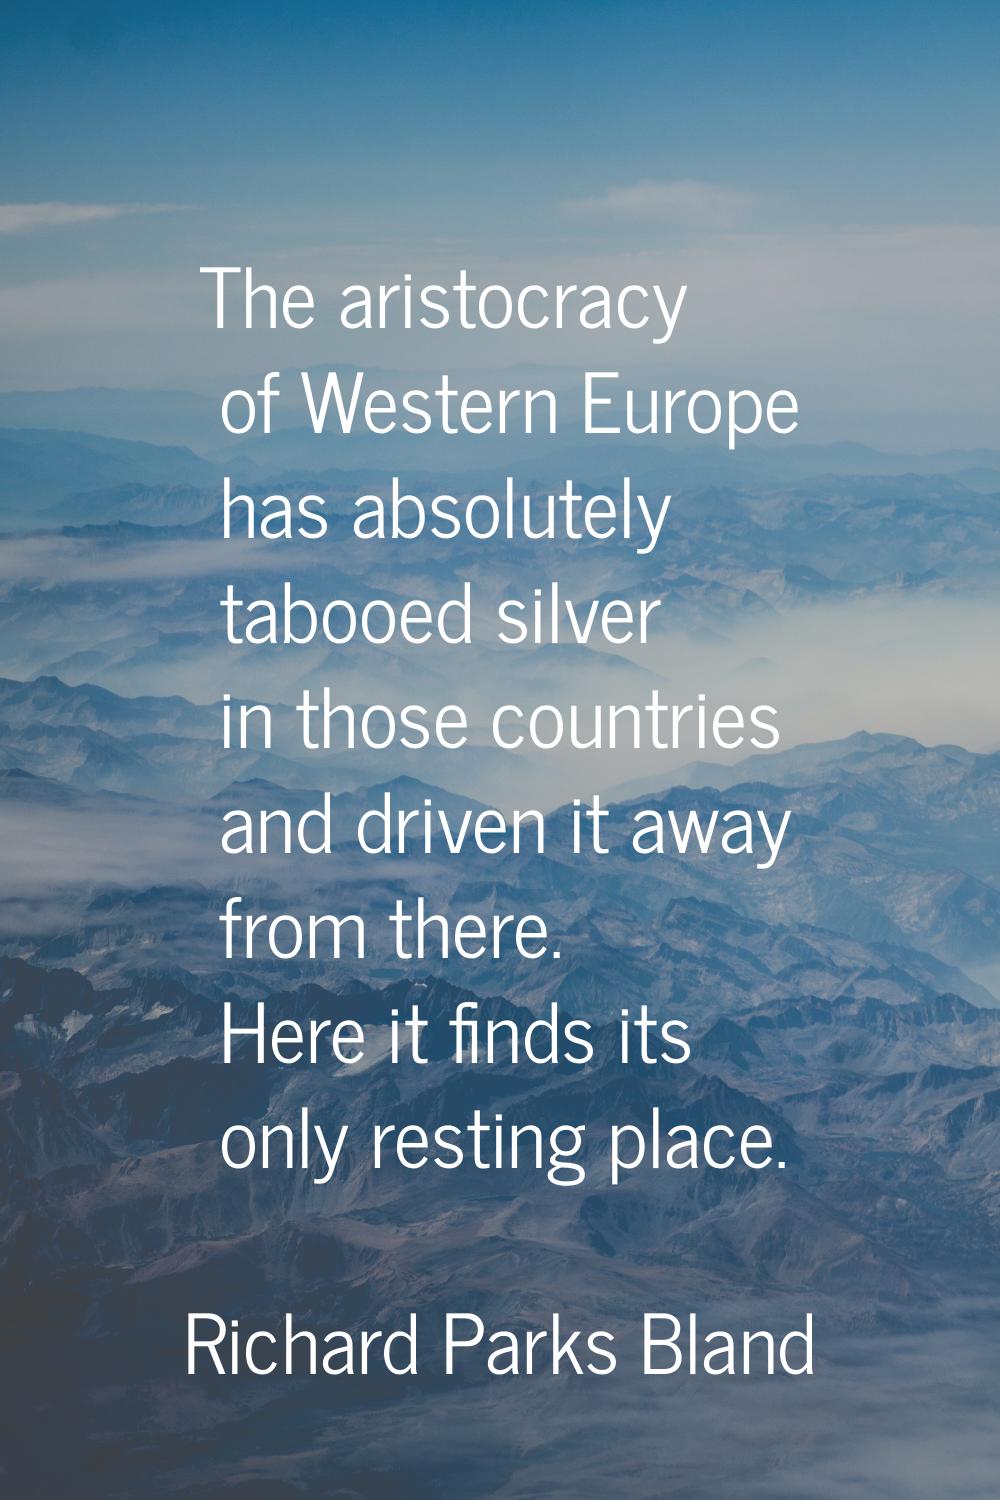 The aristocracy of Western Europe has absolutely tabooed silver in those countries and driven it aw